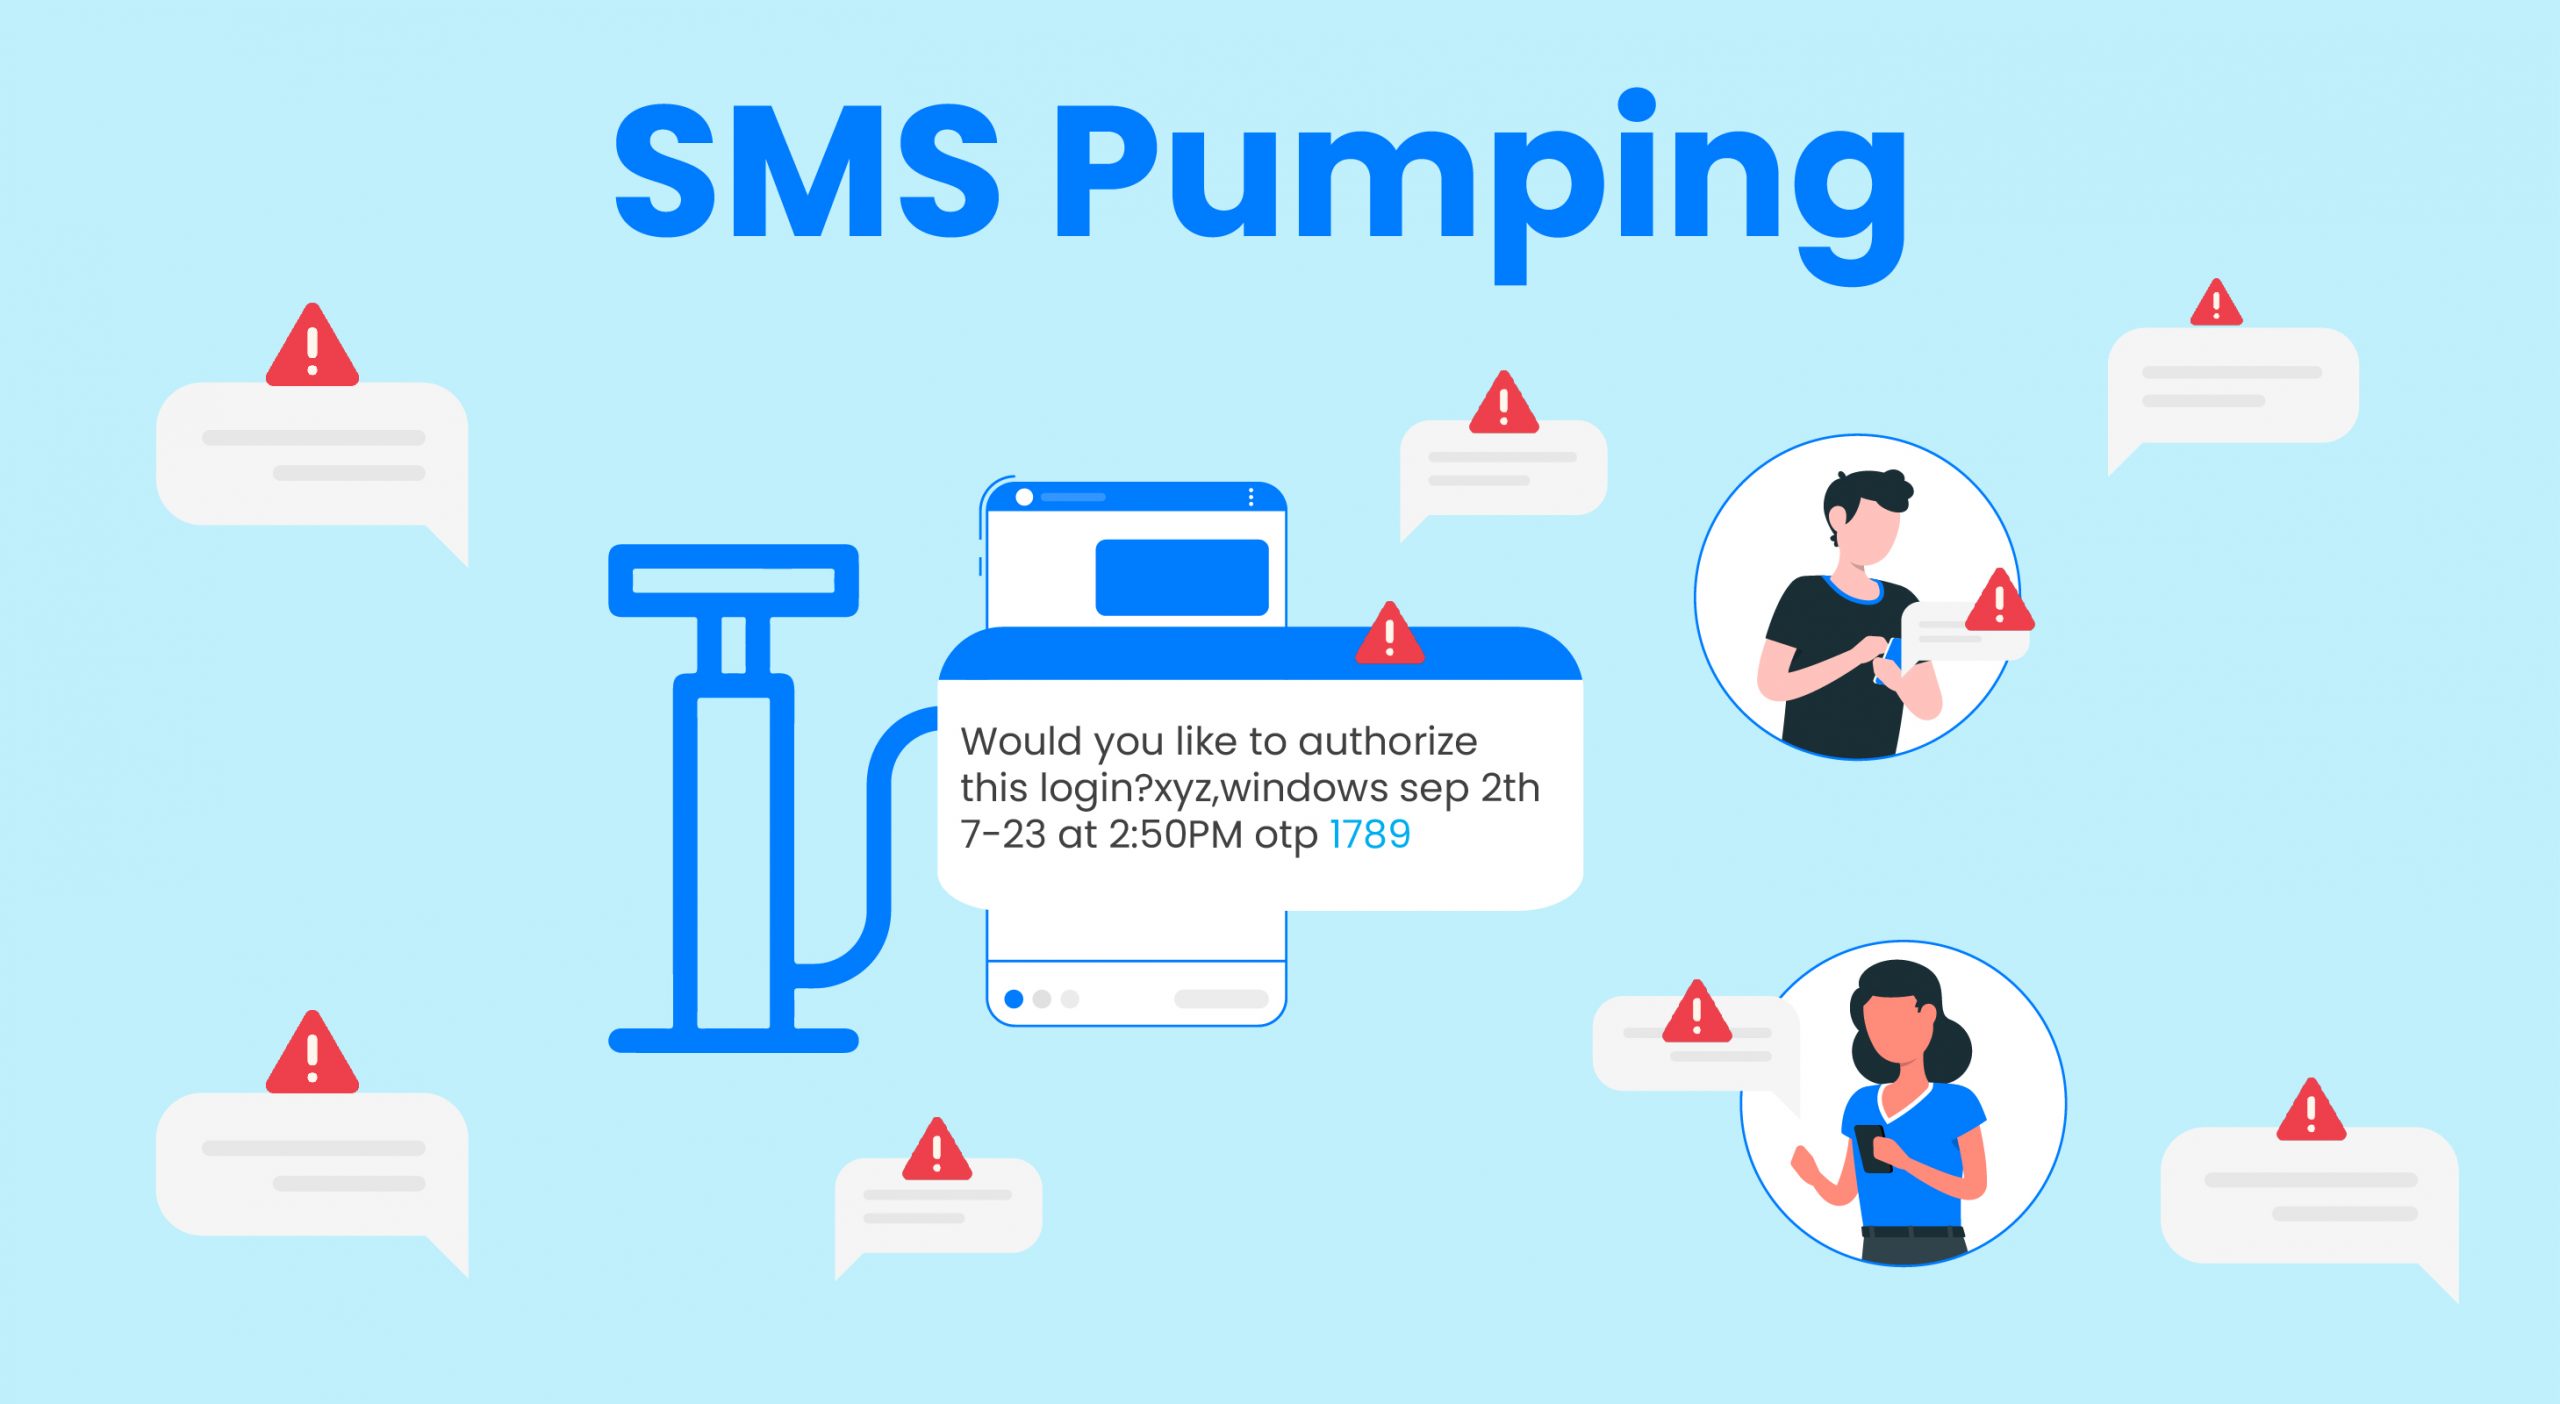 SMS Pumping: A Threat To Businesses And How To Overcome It